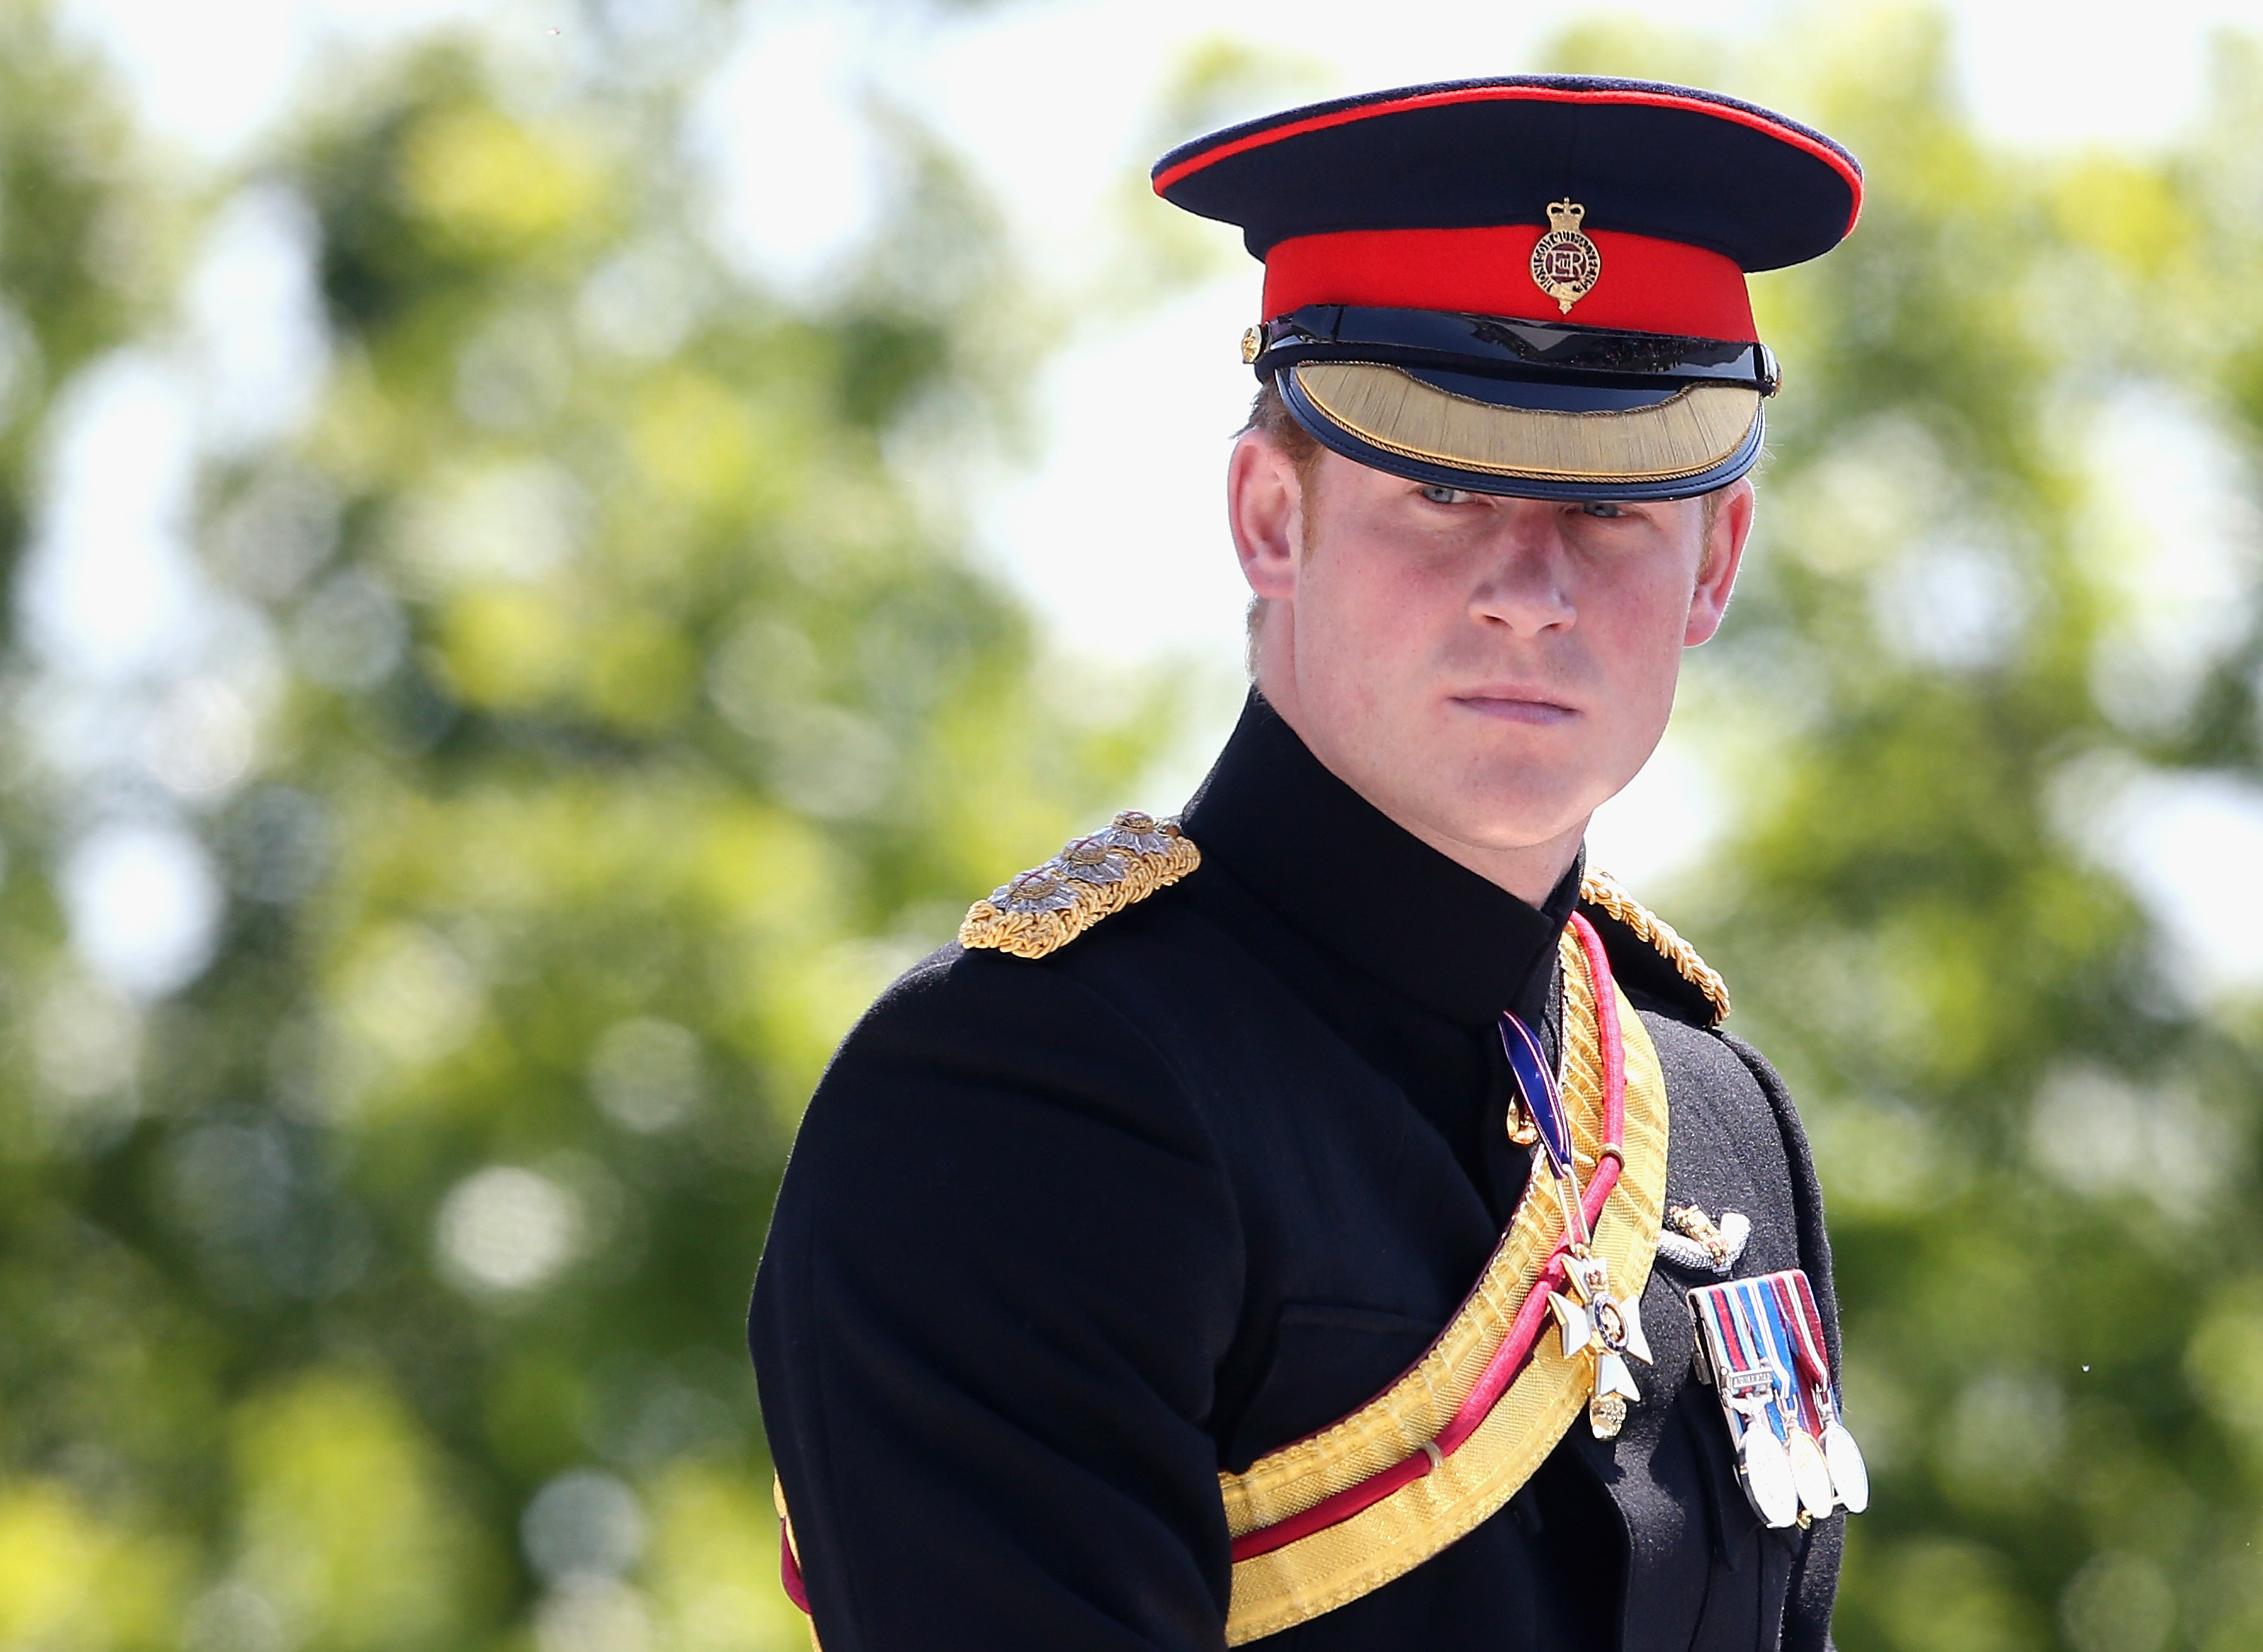 Prince Harry attends the unveiling of the Bastion Memorial at The National Memorial Arboretum on June 11, 2015 in Stafford, England.